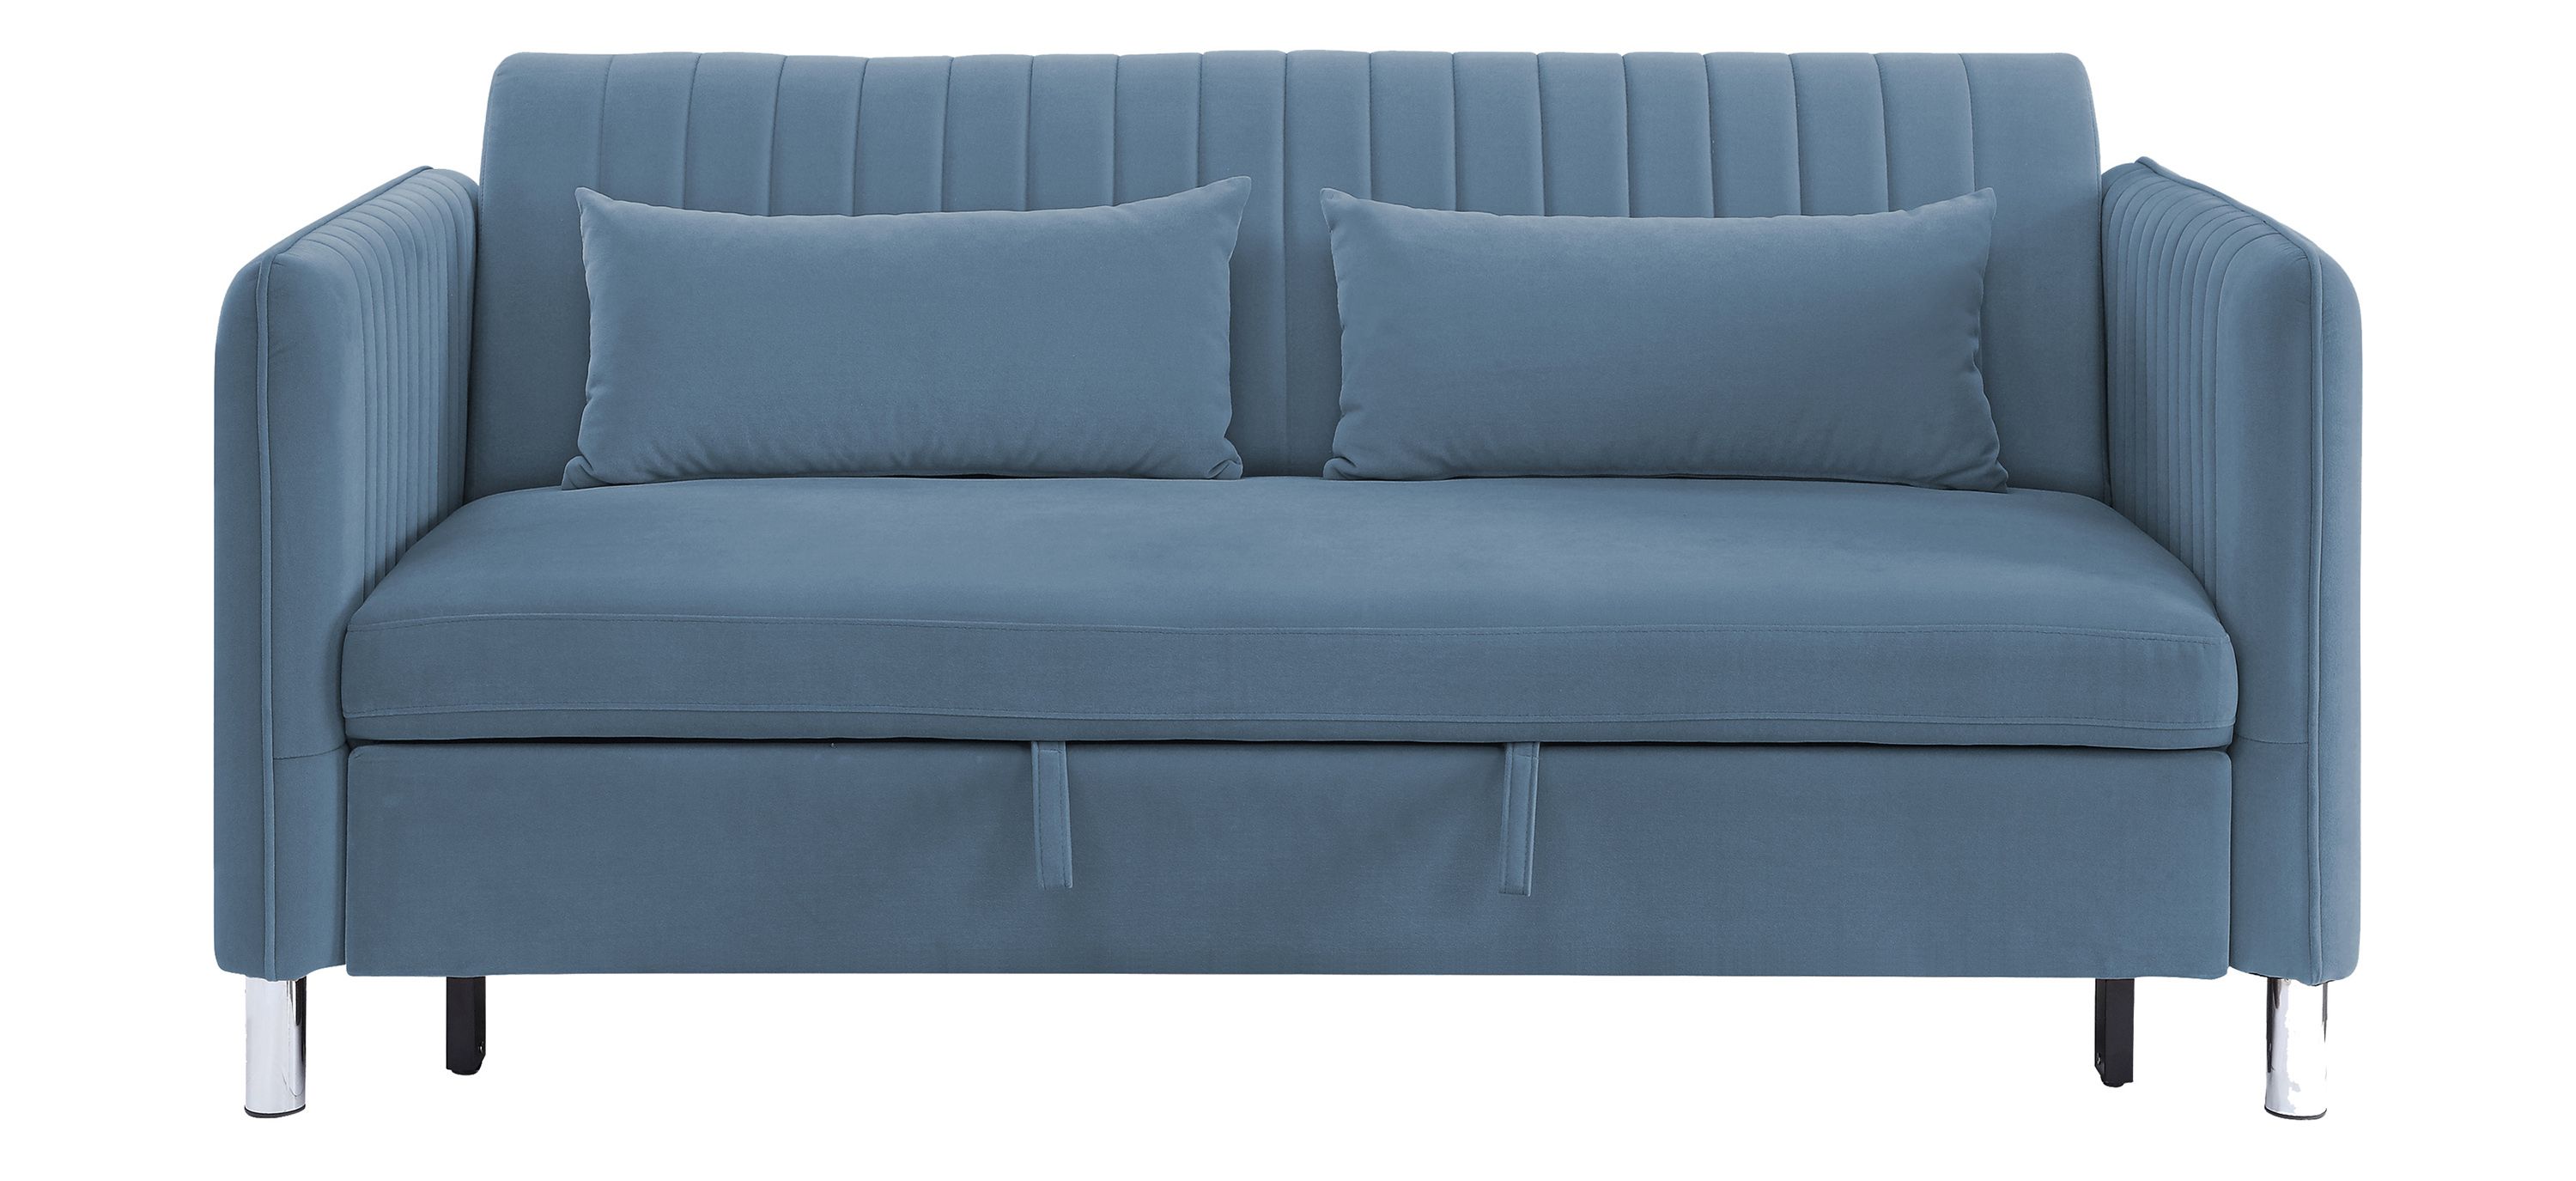 Hume Klick-Klak Sofa with Pull-Out Bed